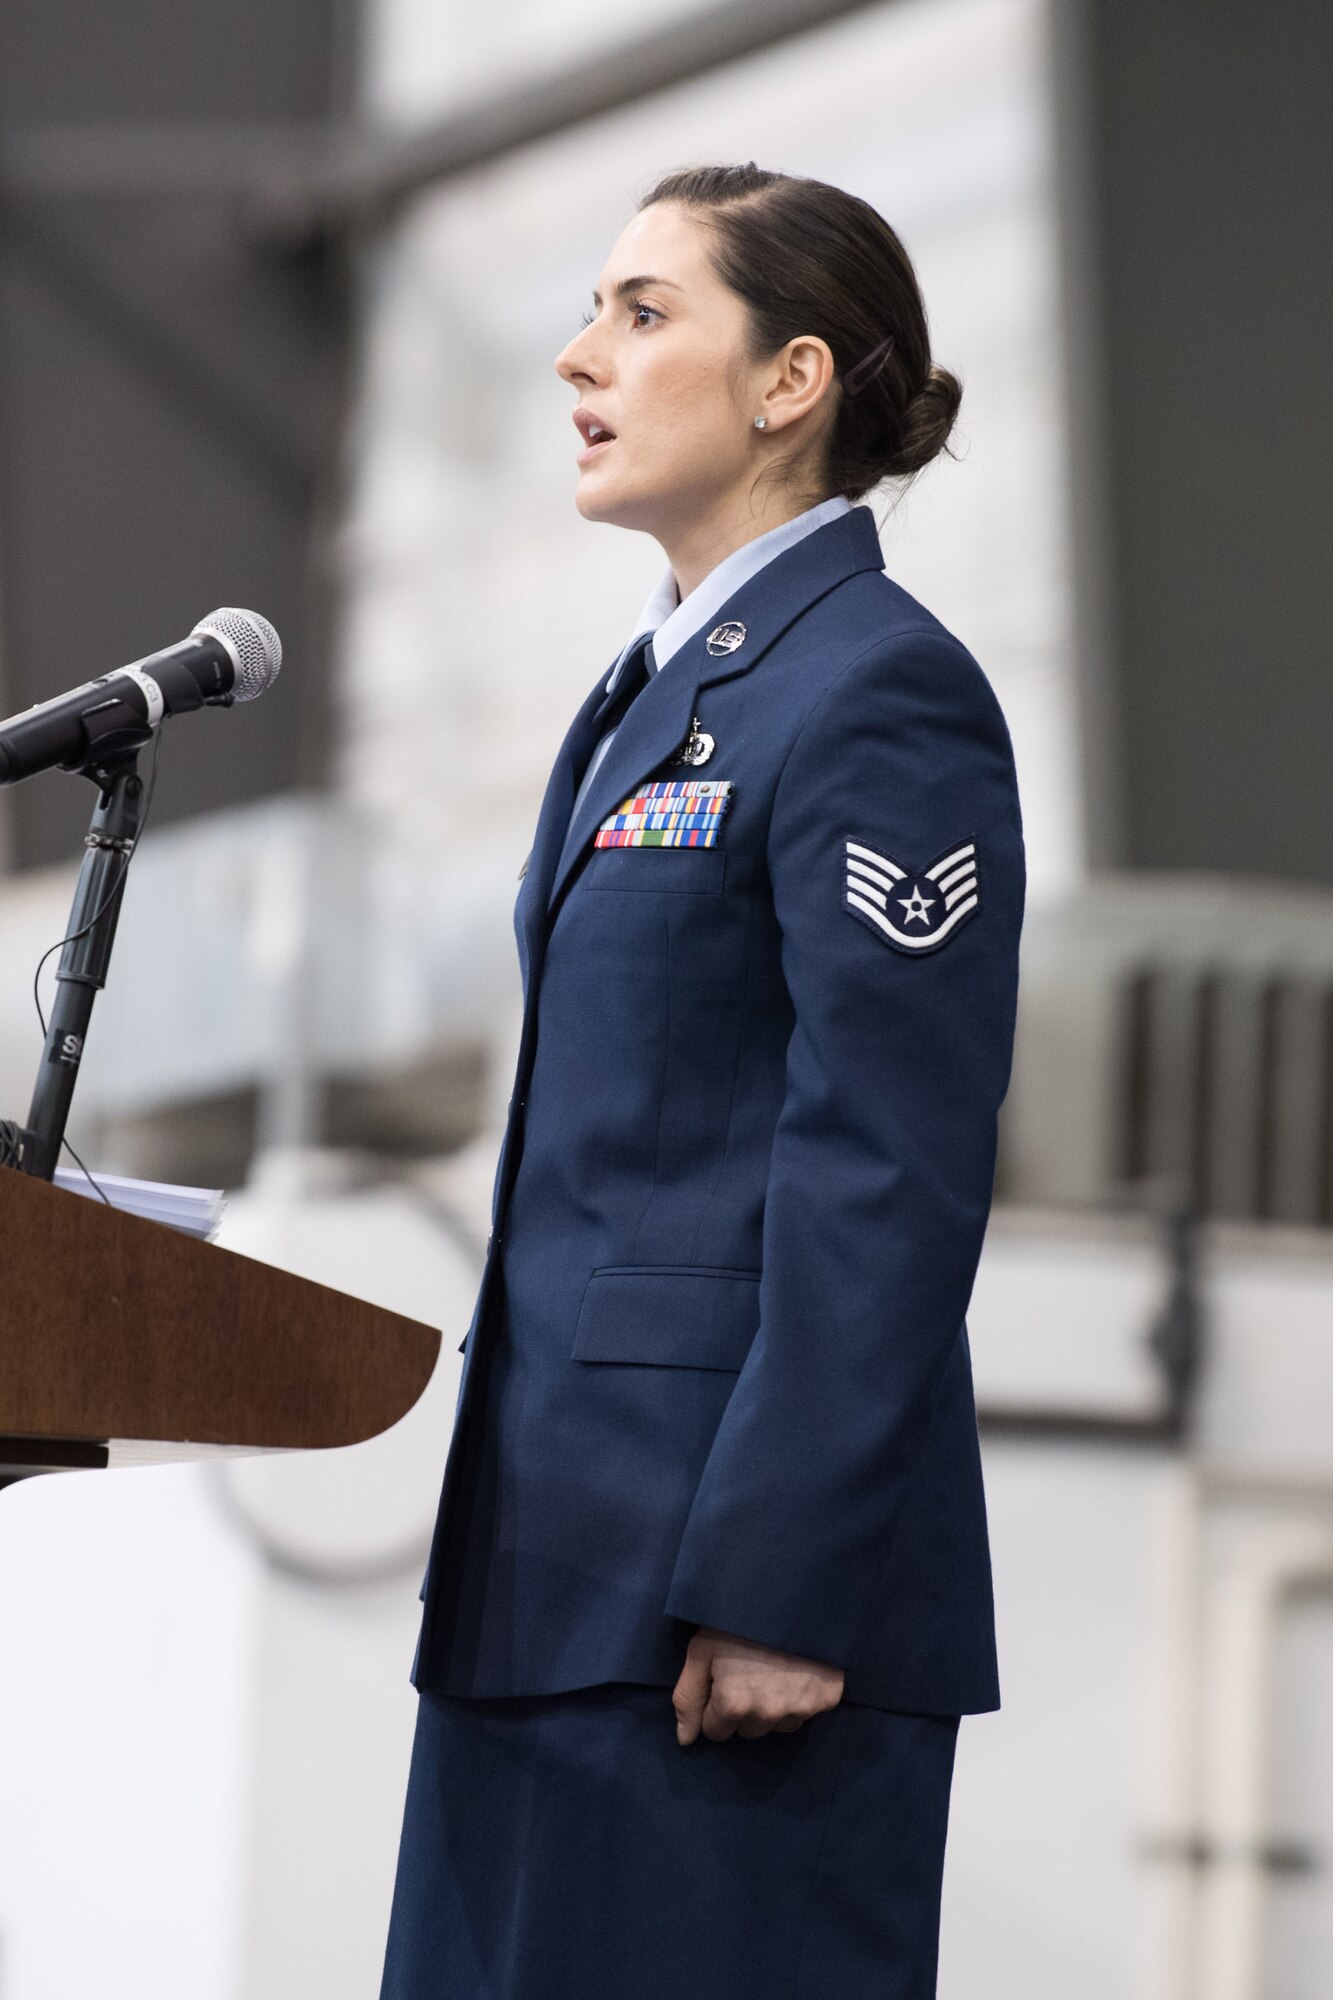 Staff Sgt. Alicia Garcia, 436th Force Support Squadron Advanced Leadership School instructor, sings the national anthem during the 436th AW Change of Command ceremony Jan 7, 2020, at Dover Air Force Base, Del. Col. Joel Safranek relinquished command to Col. Matthew Jones in a ceremony officiated by 18th Air Force commander Maj. Gen. Sam C. Barrett. (U.S. Air Force photo by Mauricio Campino)